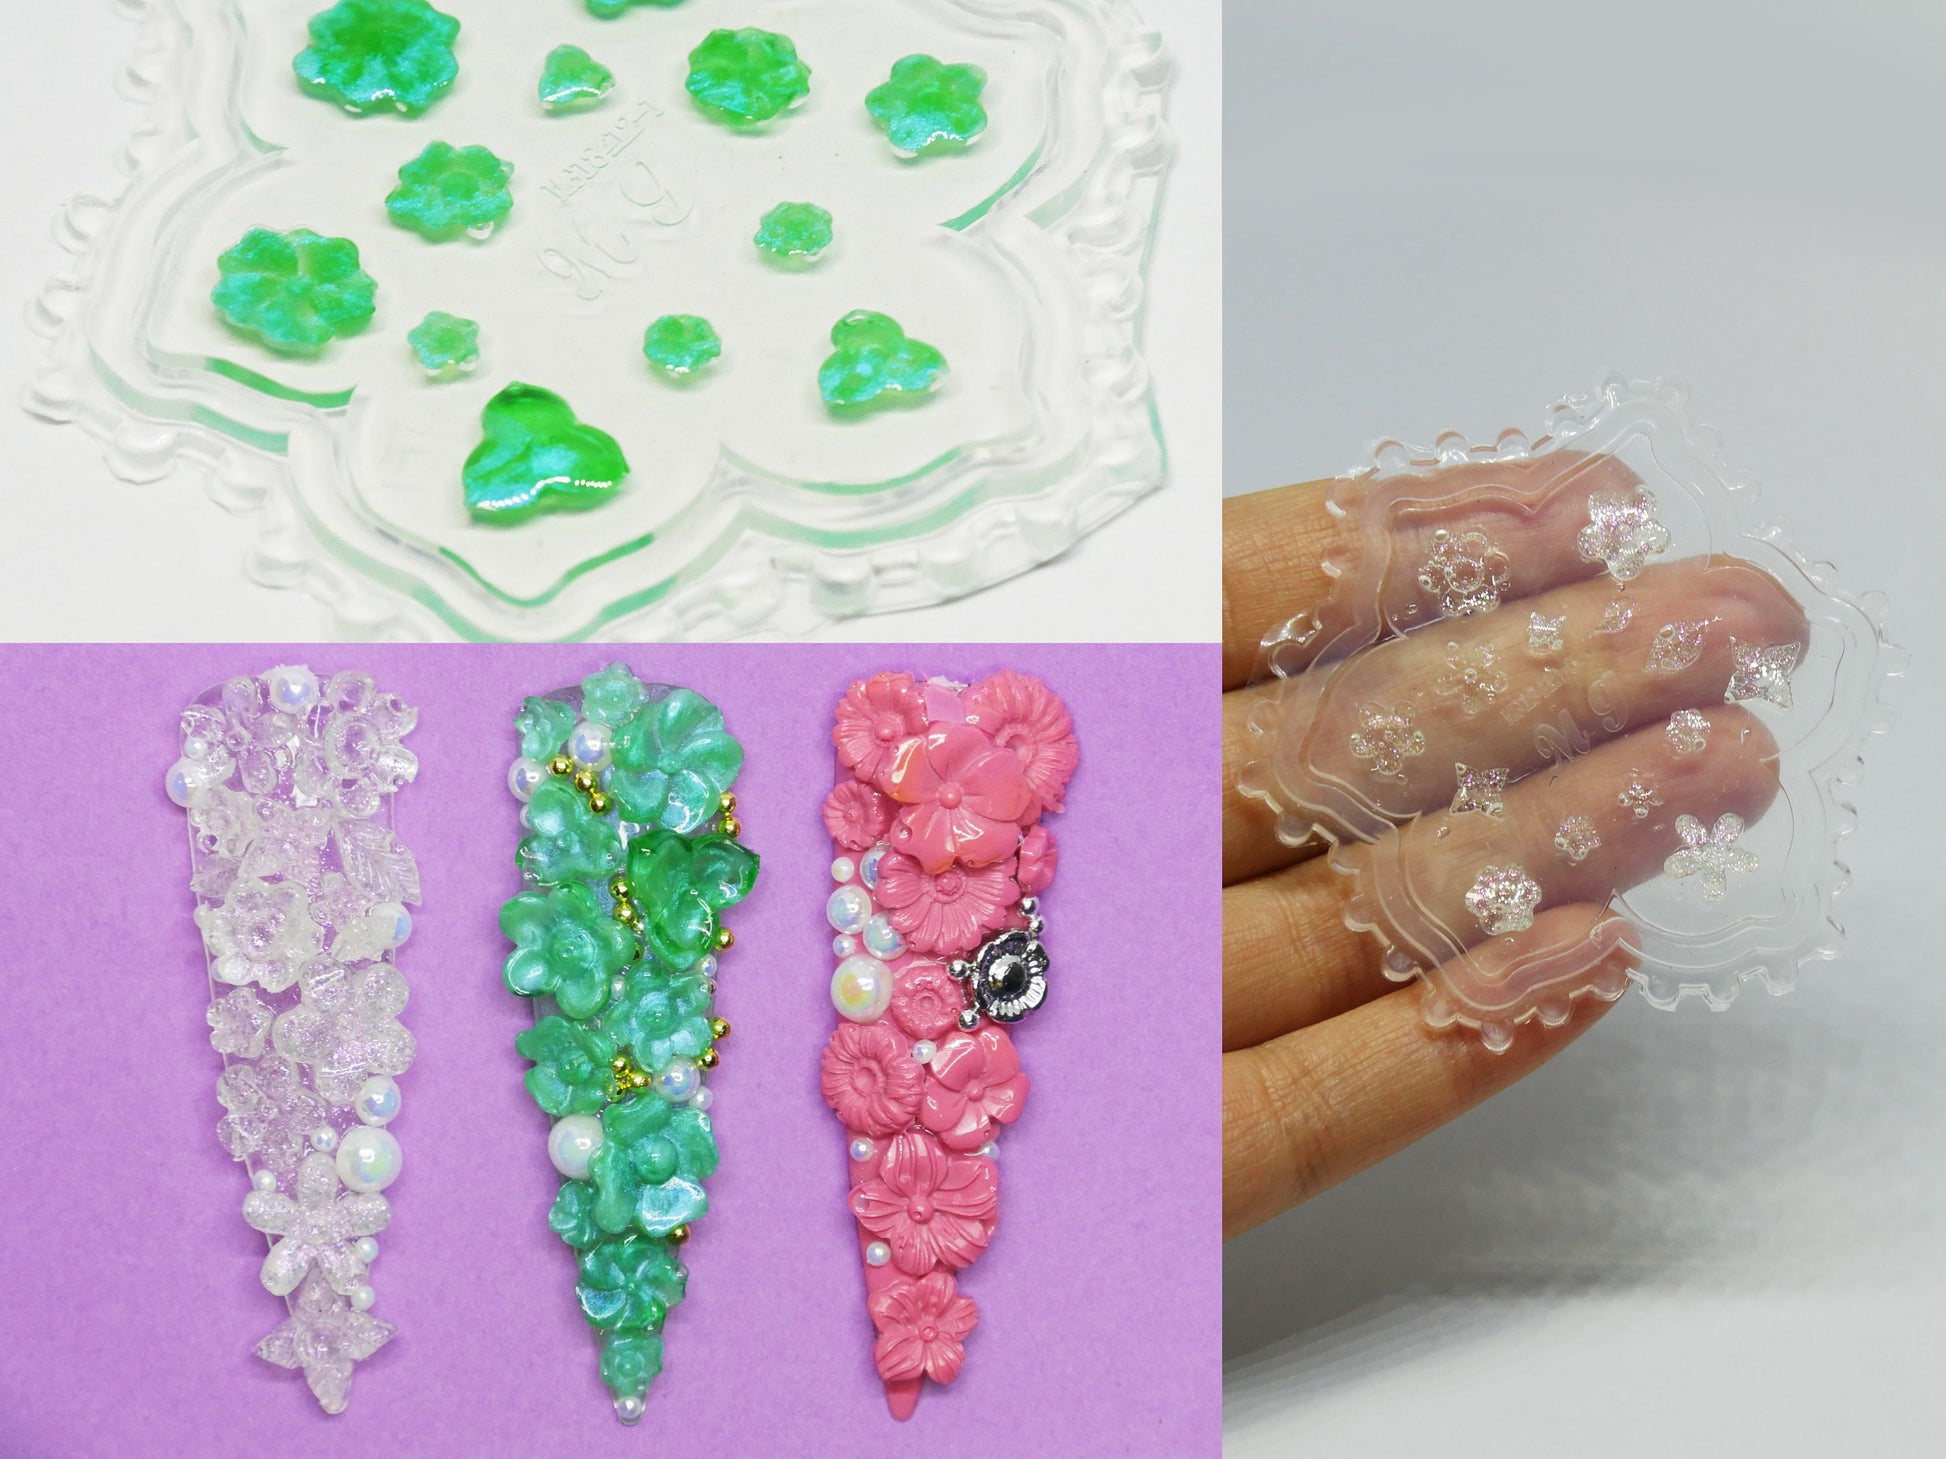 Floral 3D Acrylic Mold for Nail Art DIY Decoration Design/ UV gel Sculpture Mold Silicone Flower leaf Template Manicure